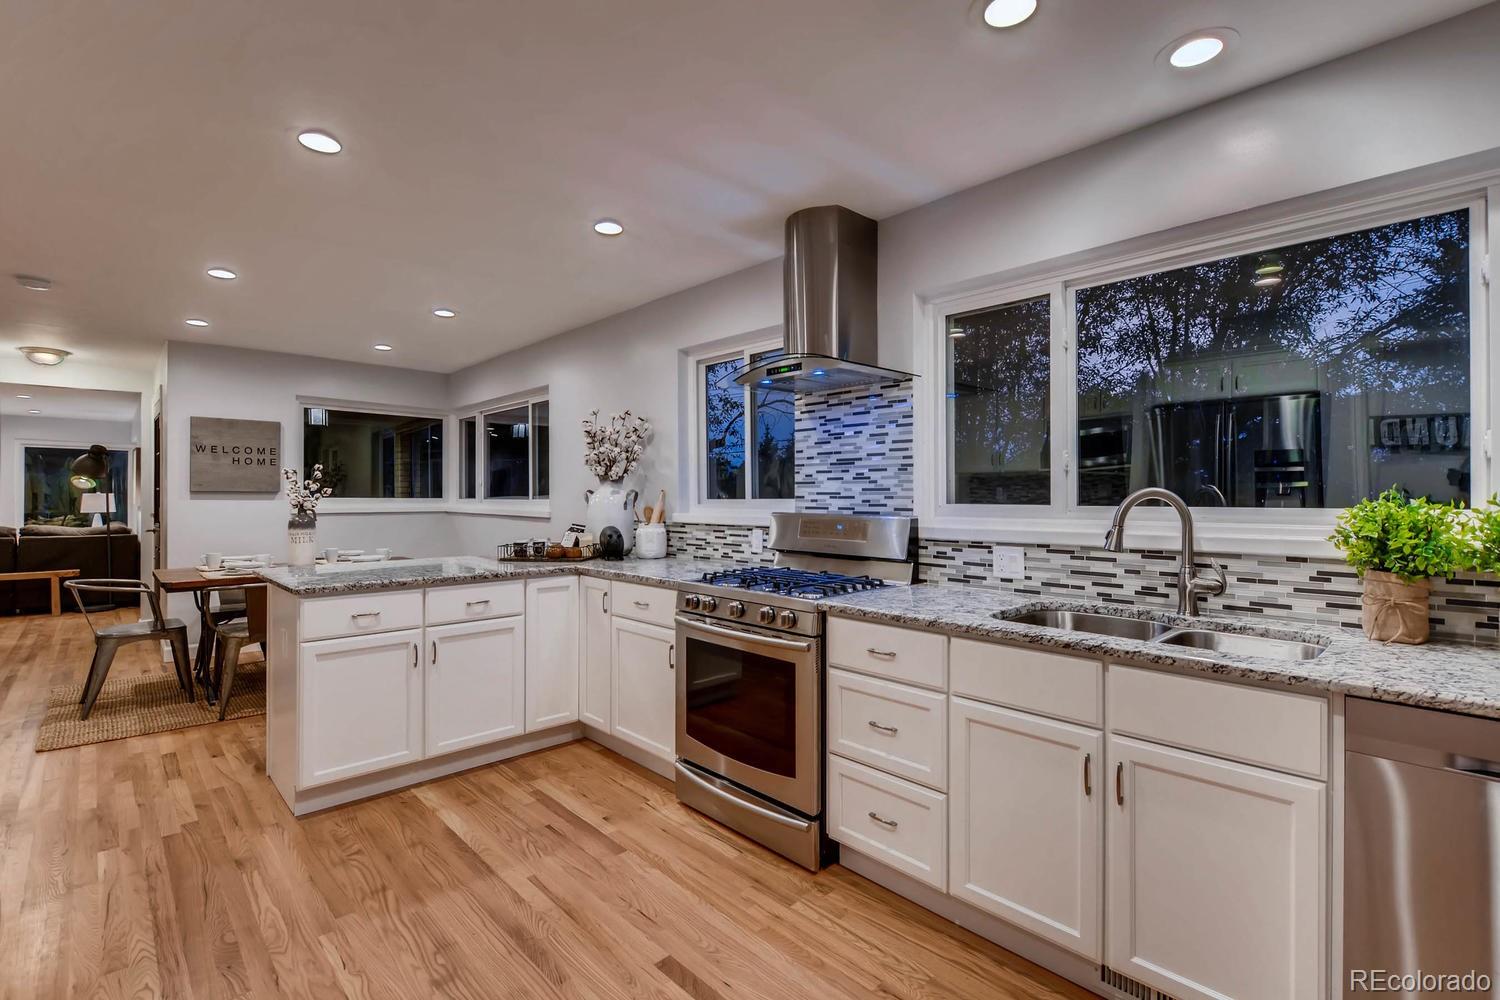 Kitchen featured in Colorado's Best Kitchens magazine! Samsung stainless appliance package, Slab granite countertops, custom cabinets with slow close drawers & doors